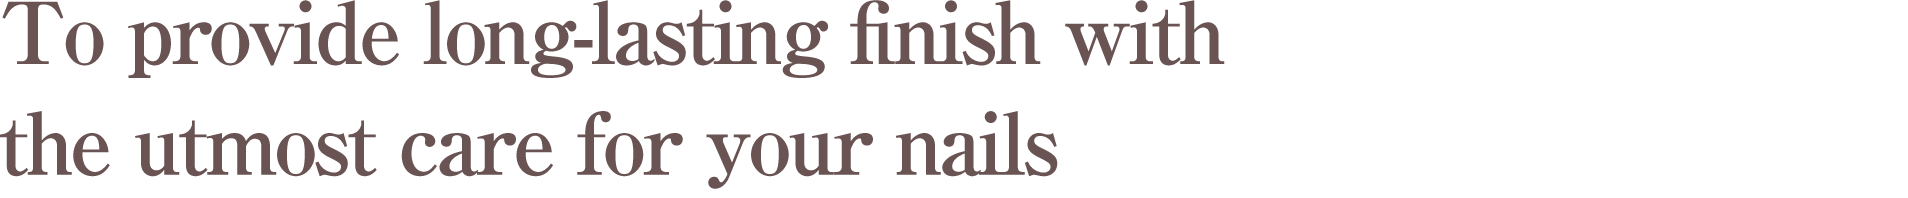 To provide long-lasting finish with the utmost care for your nails